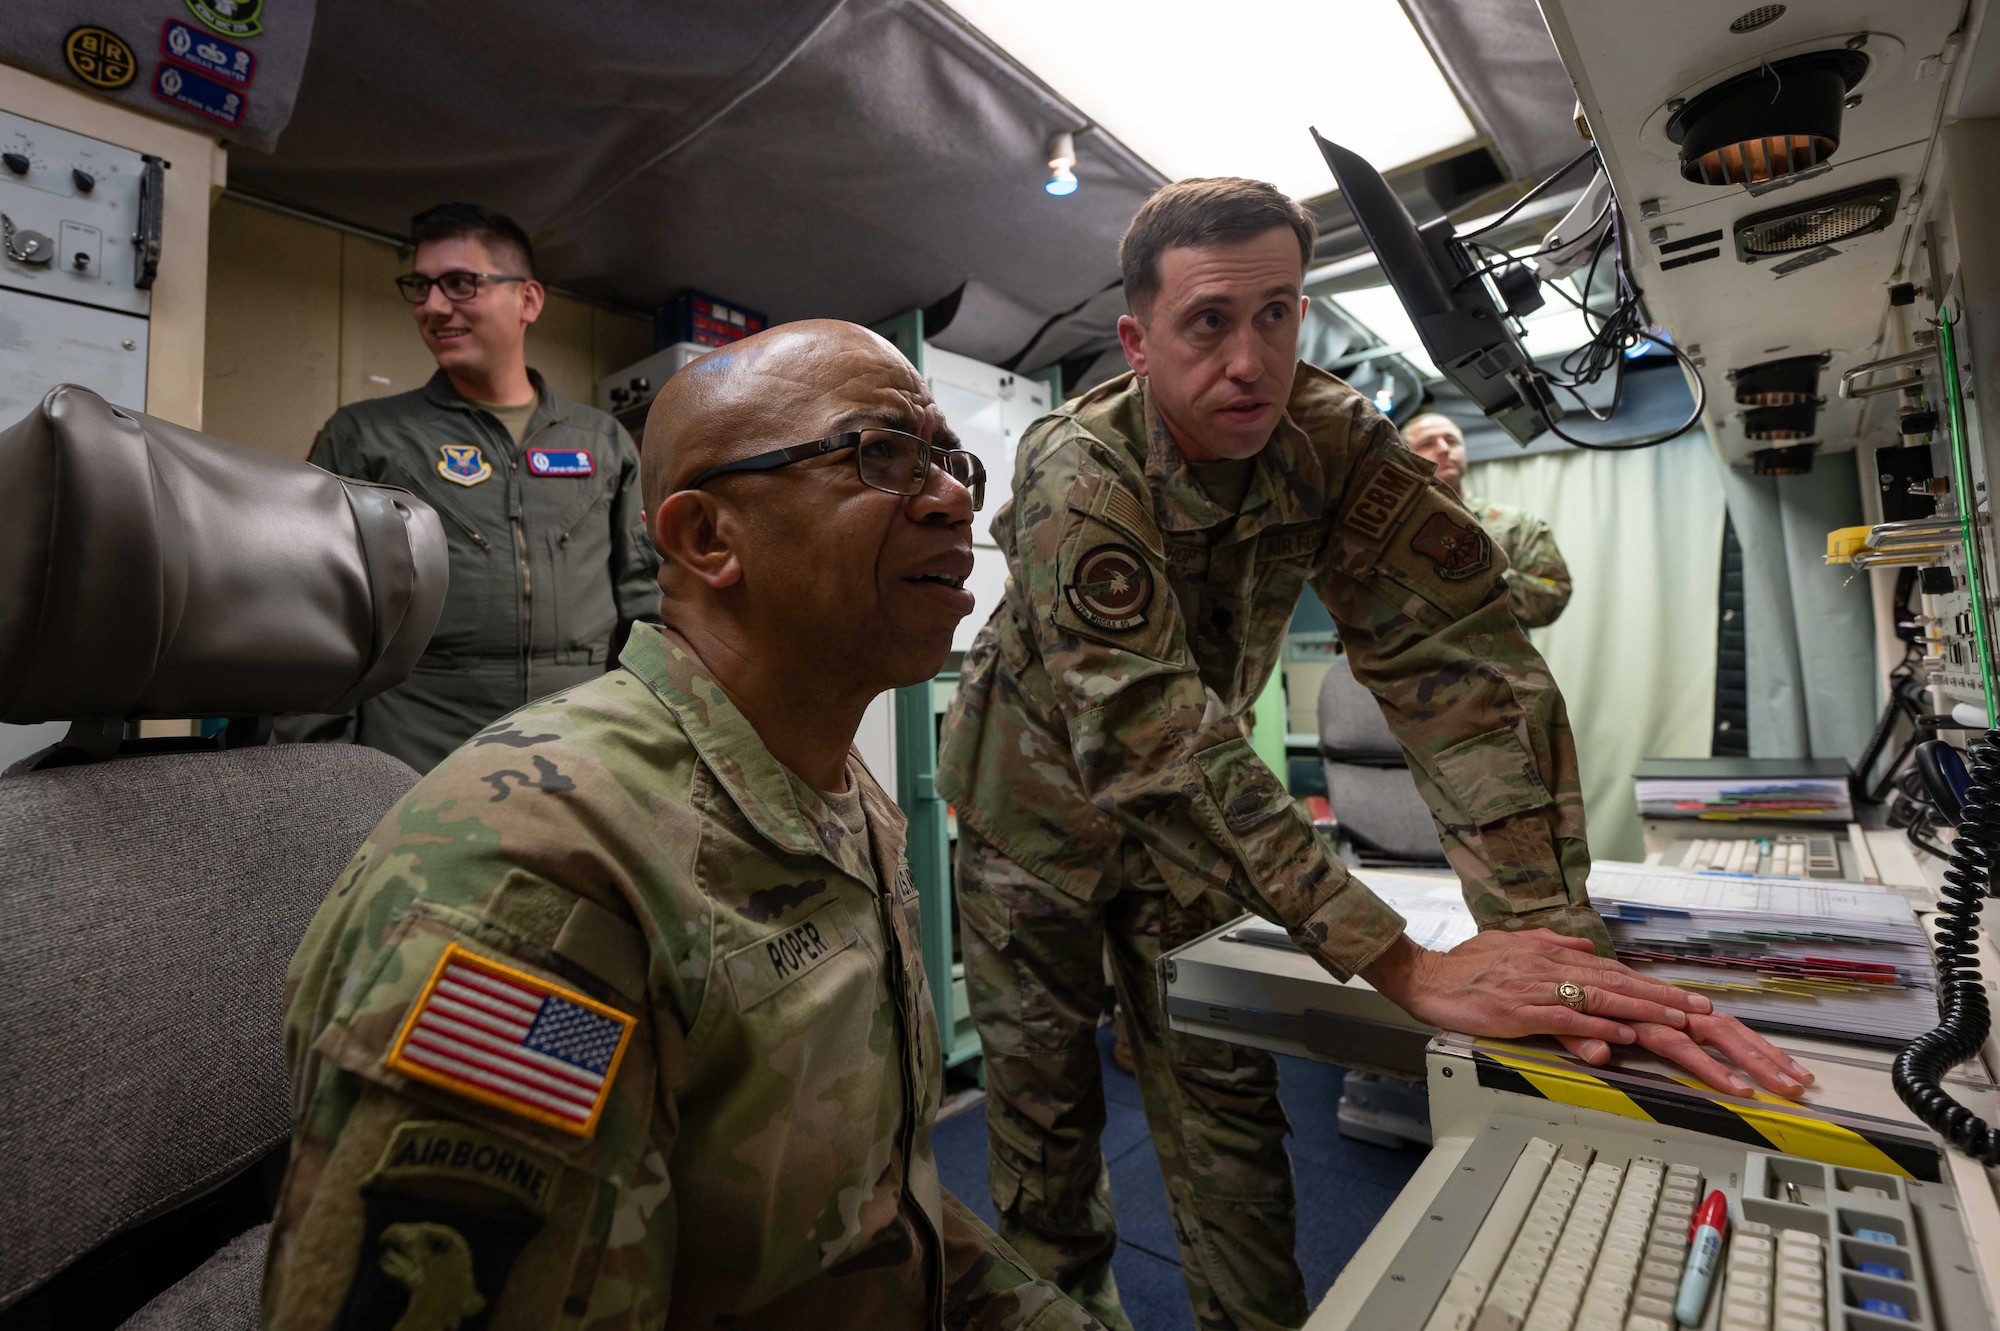 U.S. Air Force Lt. Col. Jared Bishop, 319th Missile Squadron commander, demonstrates to U.S. Army Lt. Gen. A.C. Roper, deputy commander of U.S. Northern Command, how launch control center computers operate at the Bravo-01 missile alert facility near Bushnell, Nebraska, June 13, 2023. Roper traveled to the 90th Missile Wing and missile field to better understand how a missile wing mission operates in support of homeland defense. (U.S. Air Force photo by Senior Airman Sarah Post)